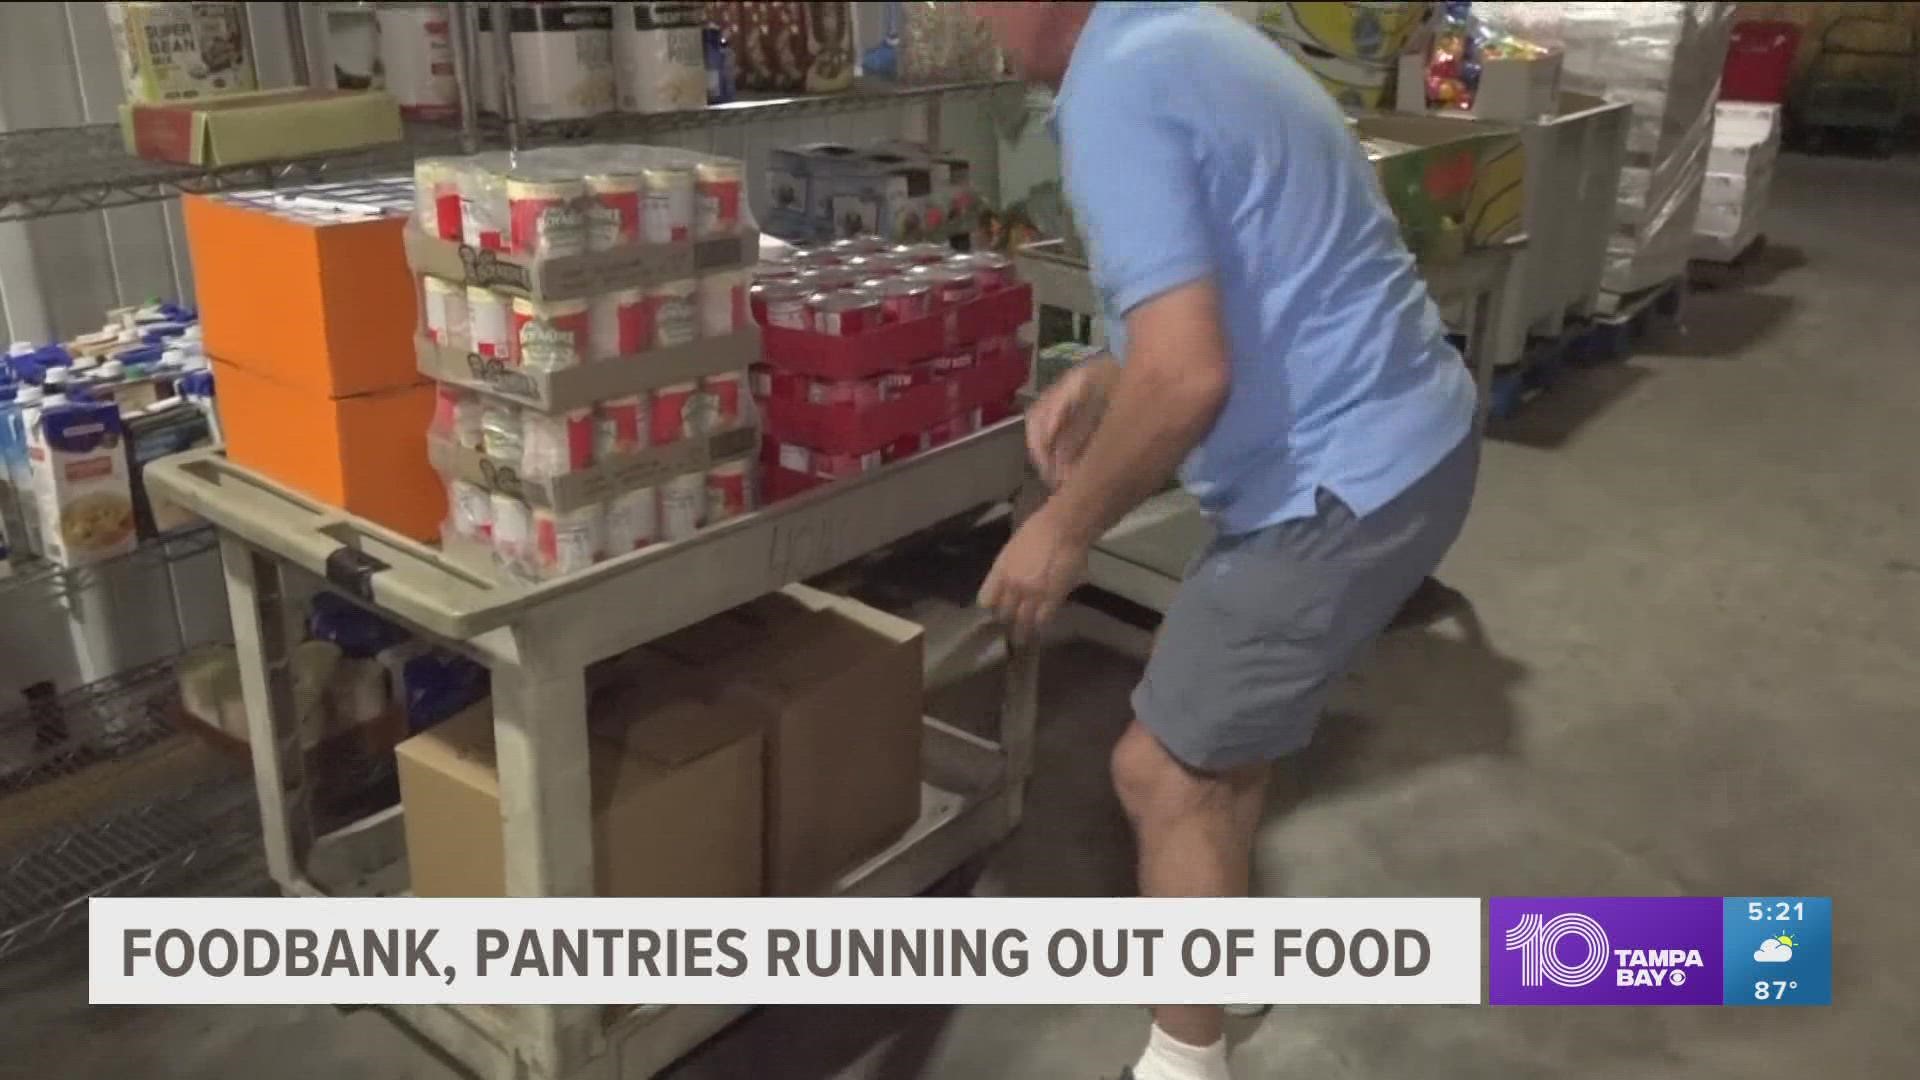 In the past few months, food prices have climbed by around 8%, and coordinators of the Food Bank of Manatee run by Meals on Wheels Plus say it's affecting services.